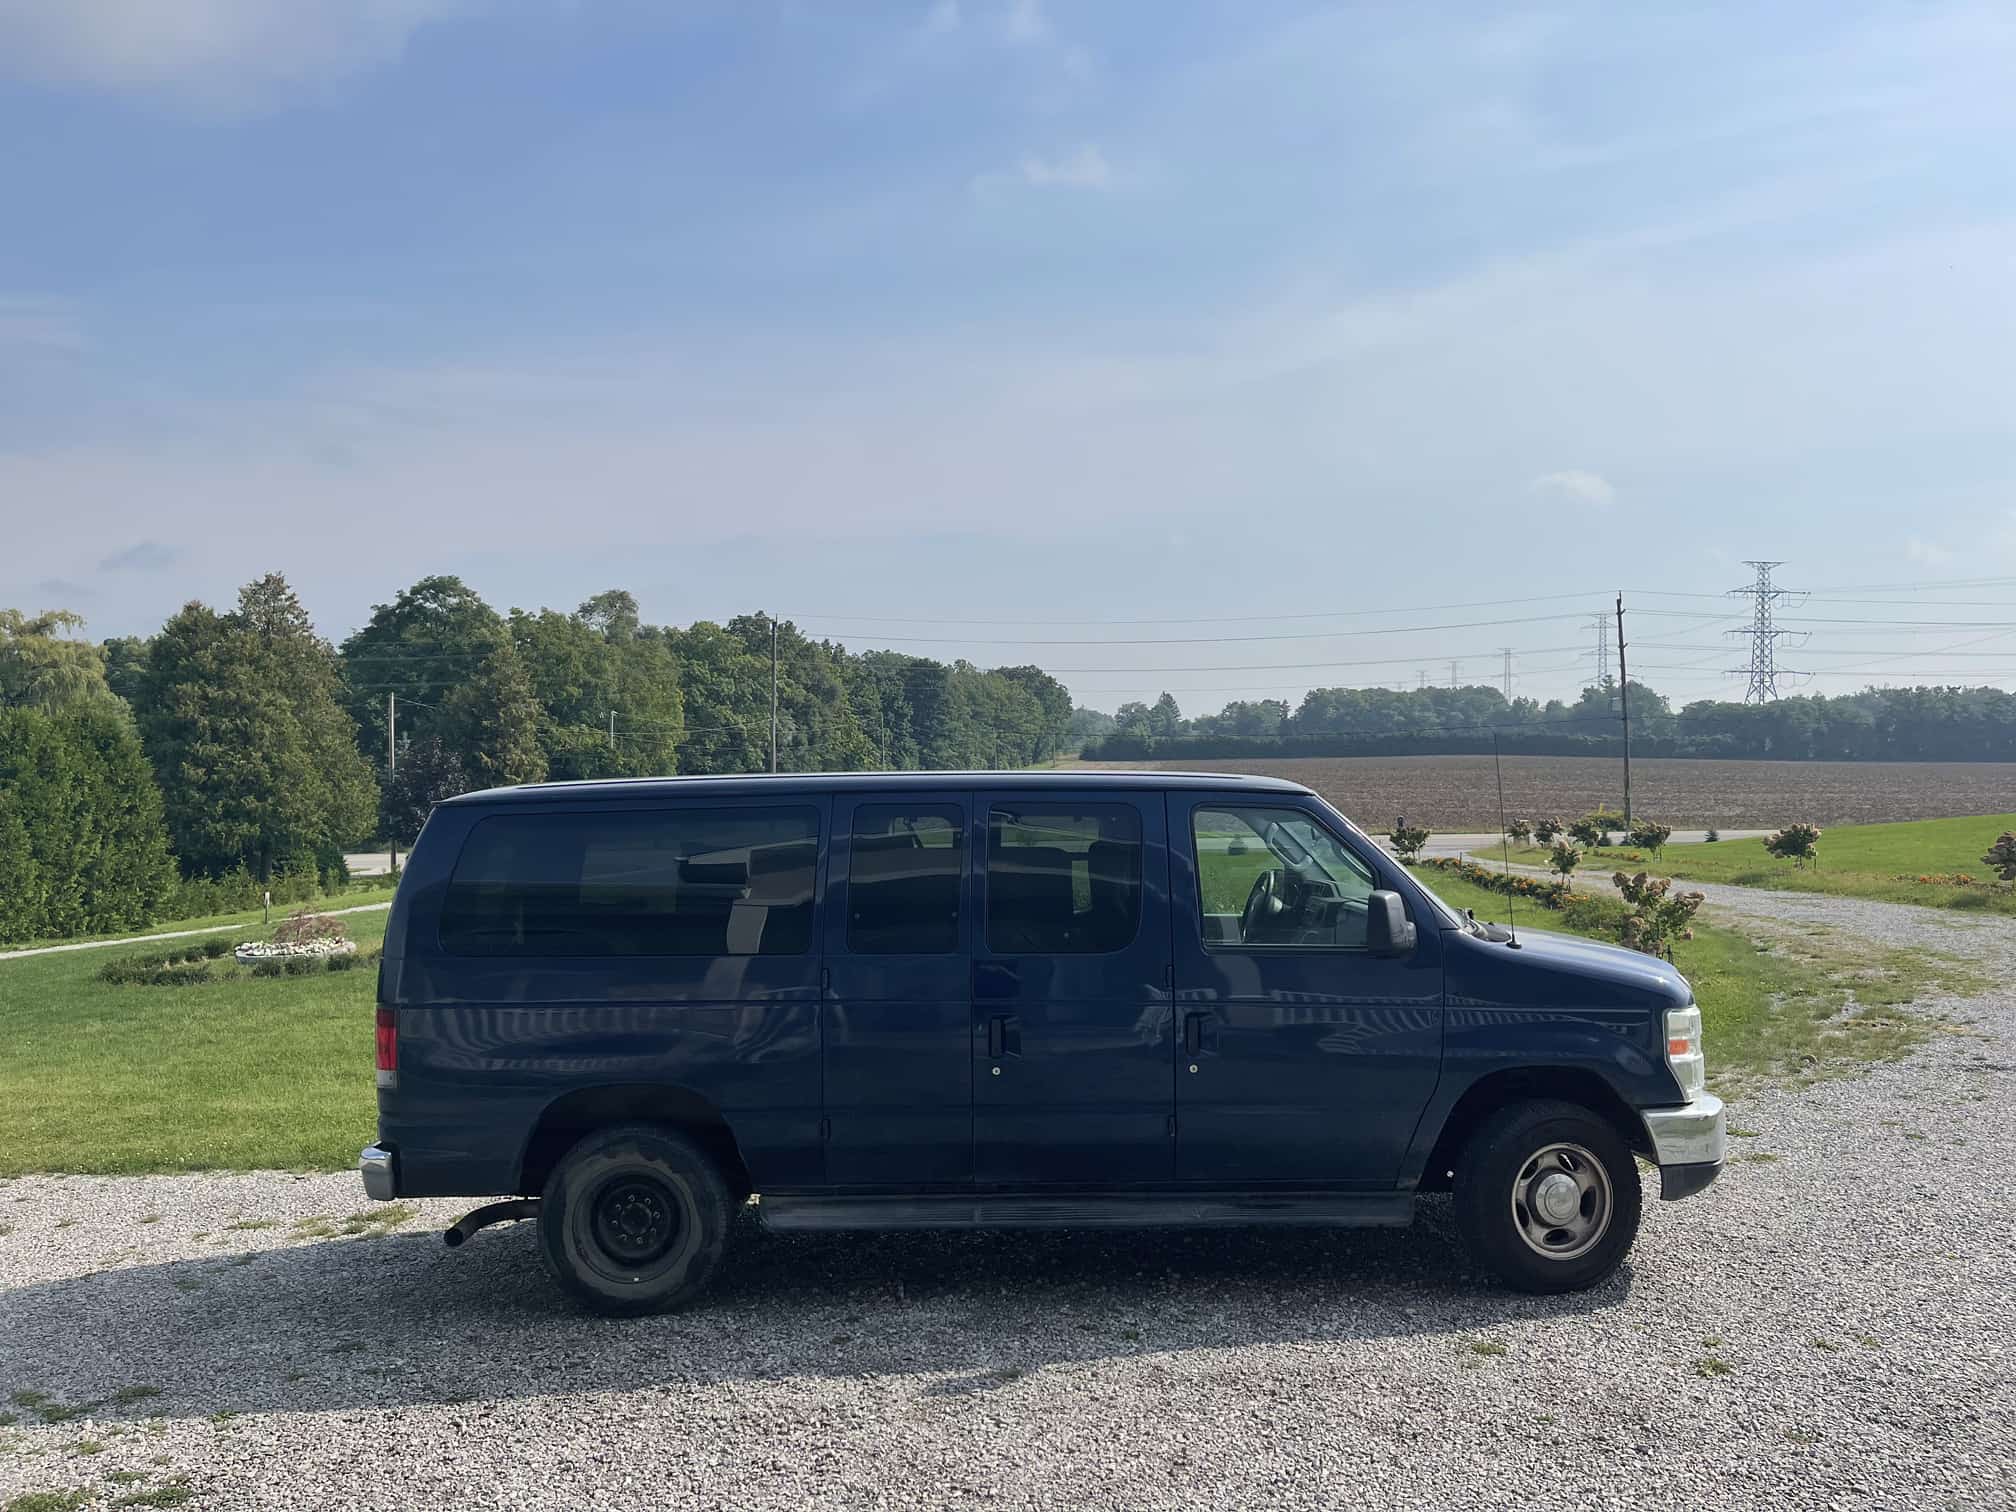 My family has a farm in wilsonville and i am visiting them so my van is on this farm 